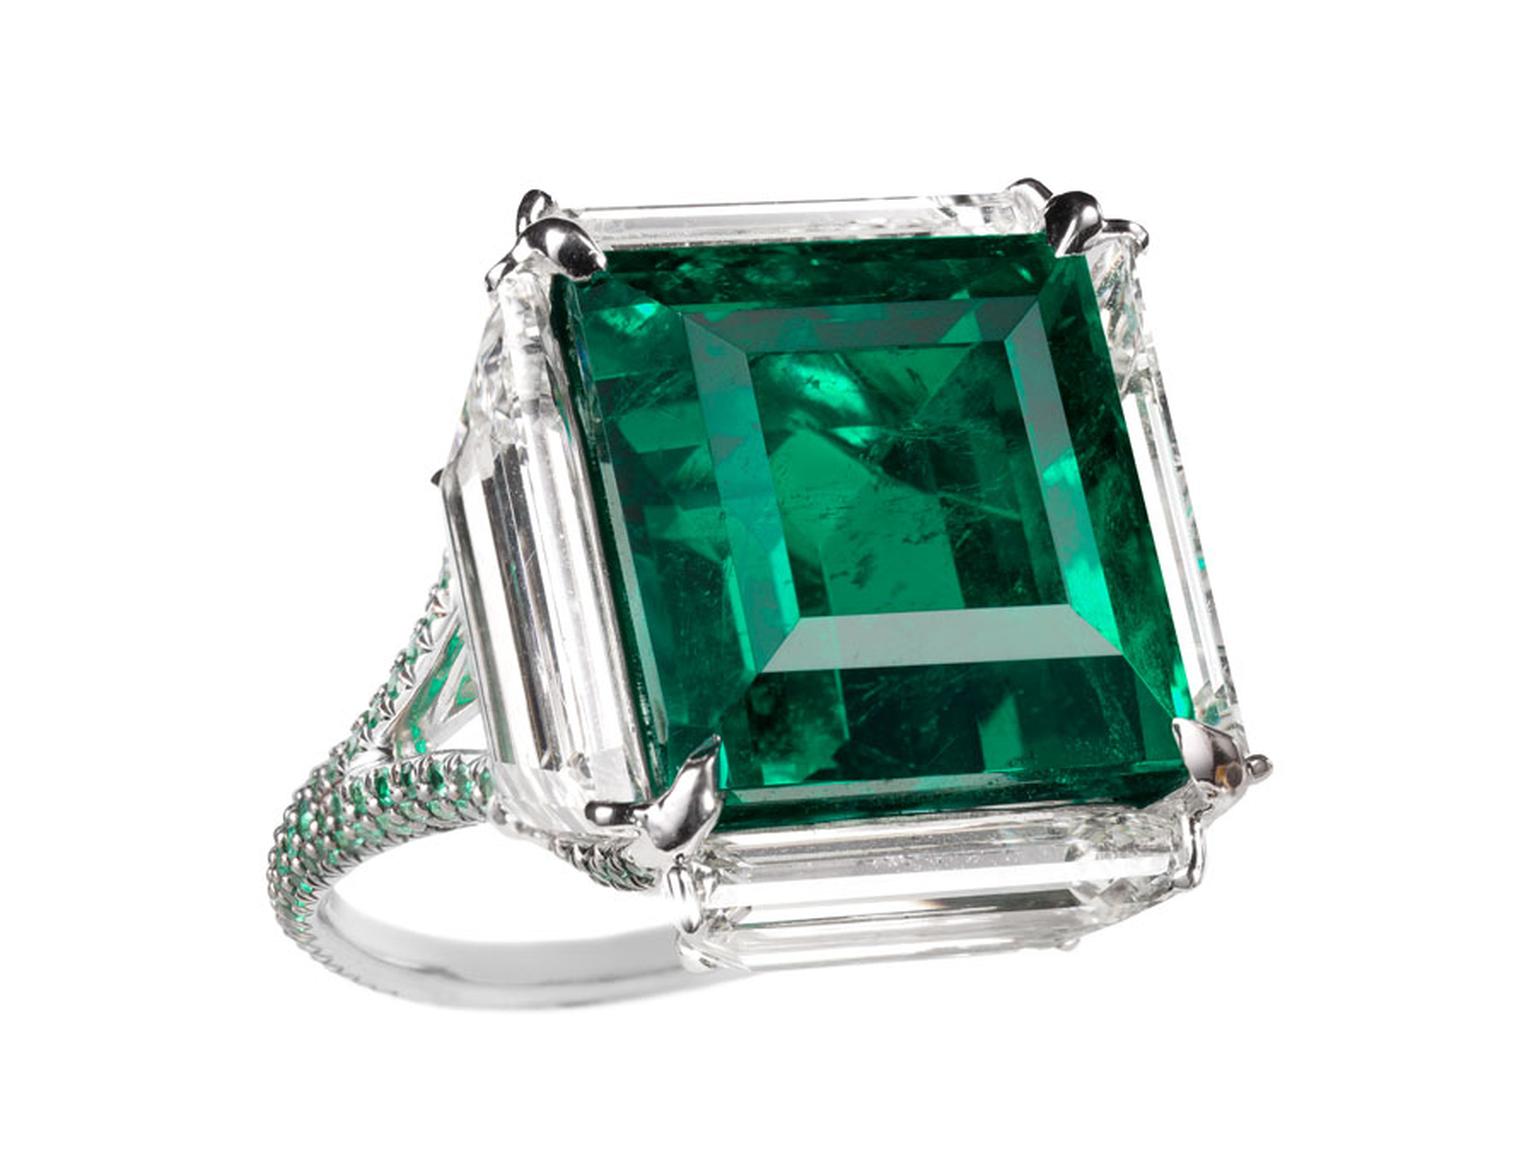 MPL-2013-BOGH-ART-Colombian-Emerald-surrounded-by-diamonds.jpg